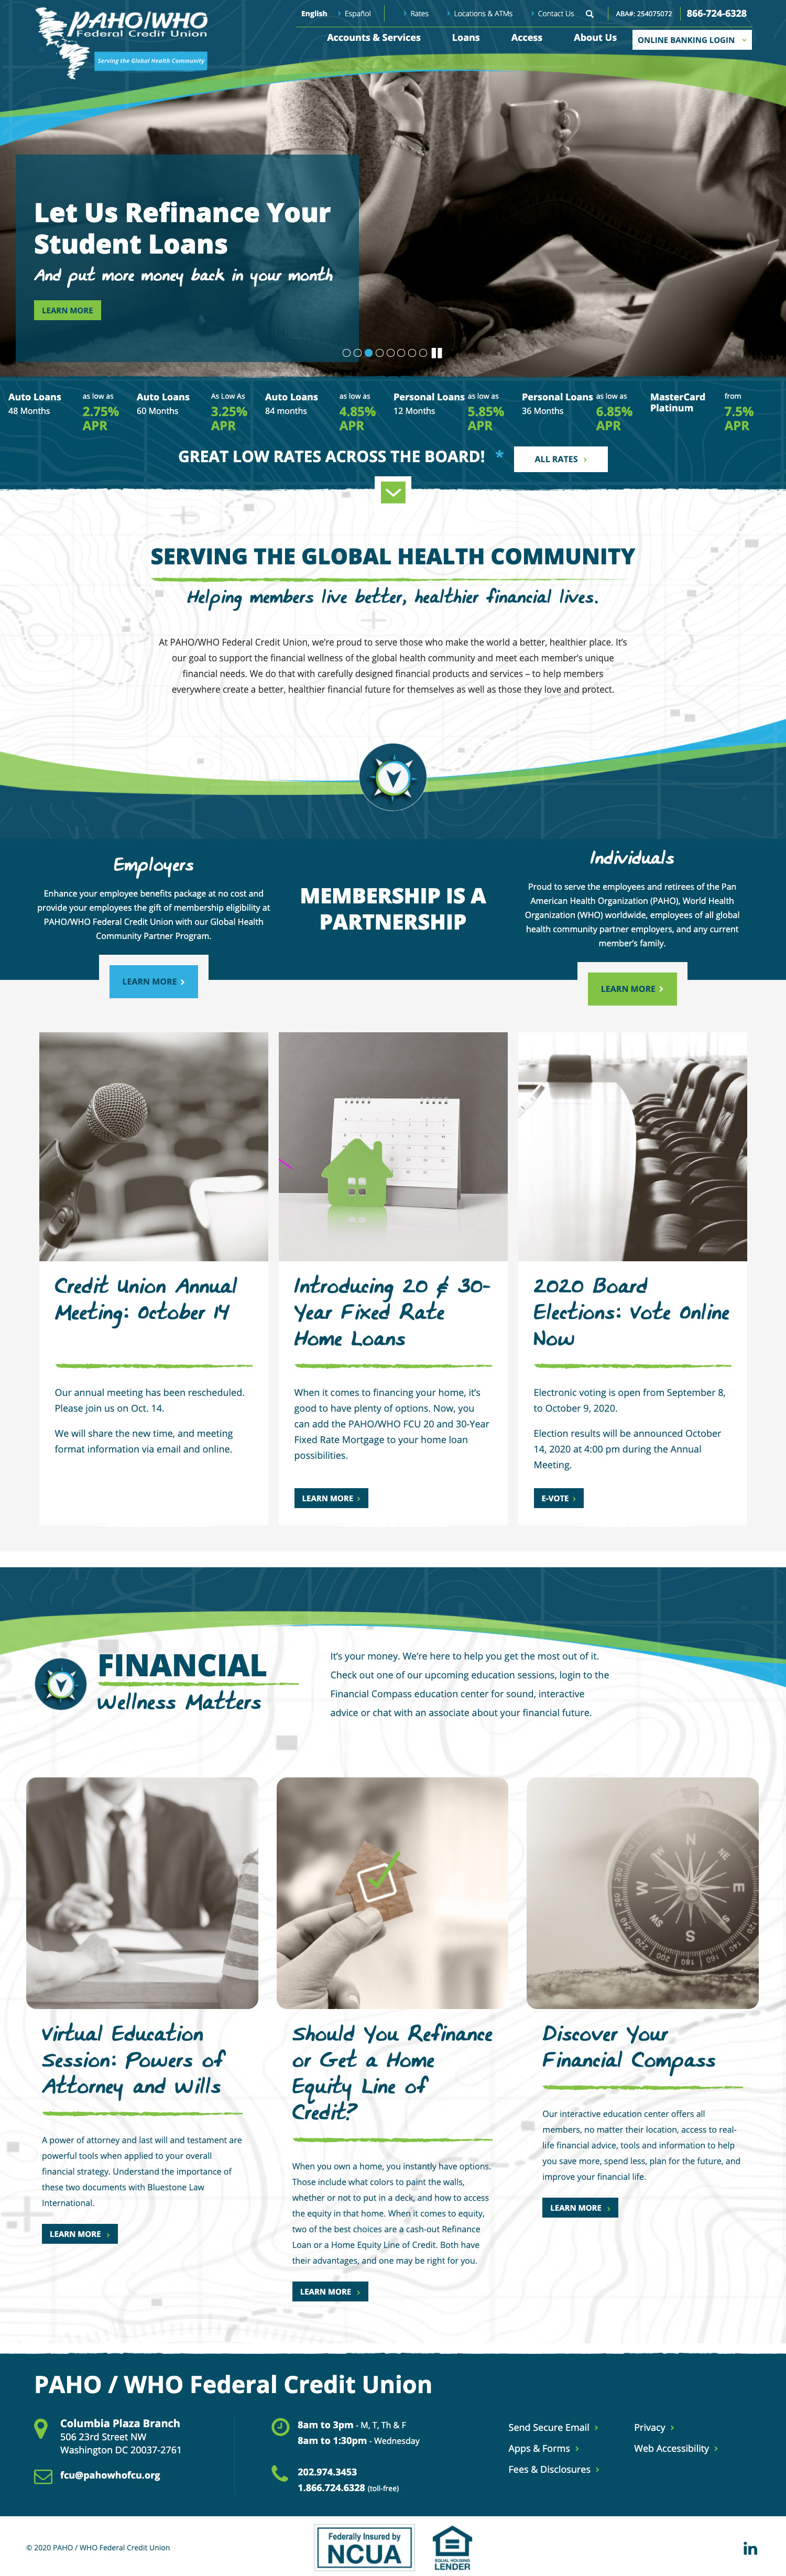 PAHO / WHO Federal Credit Union homepage design for desktop